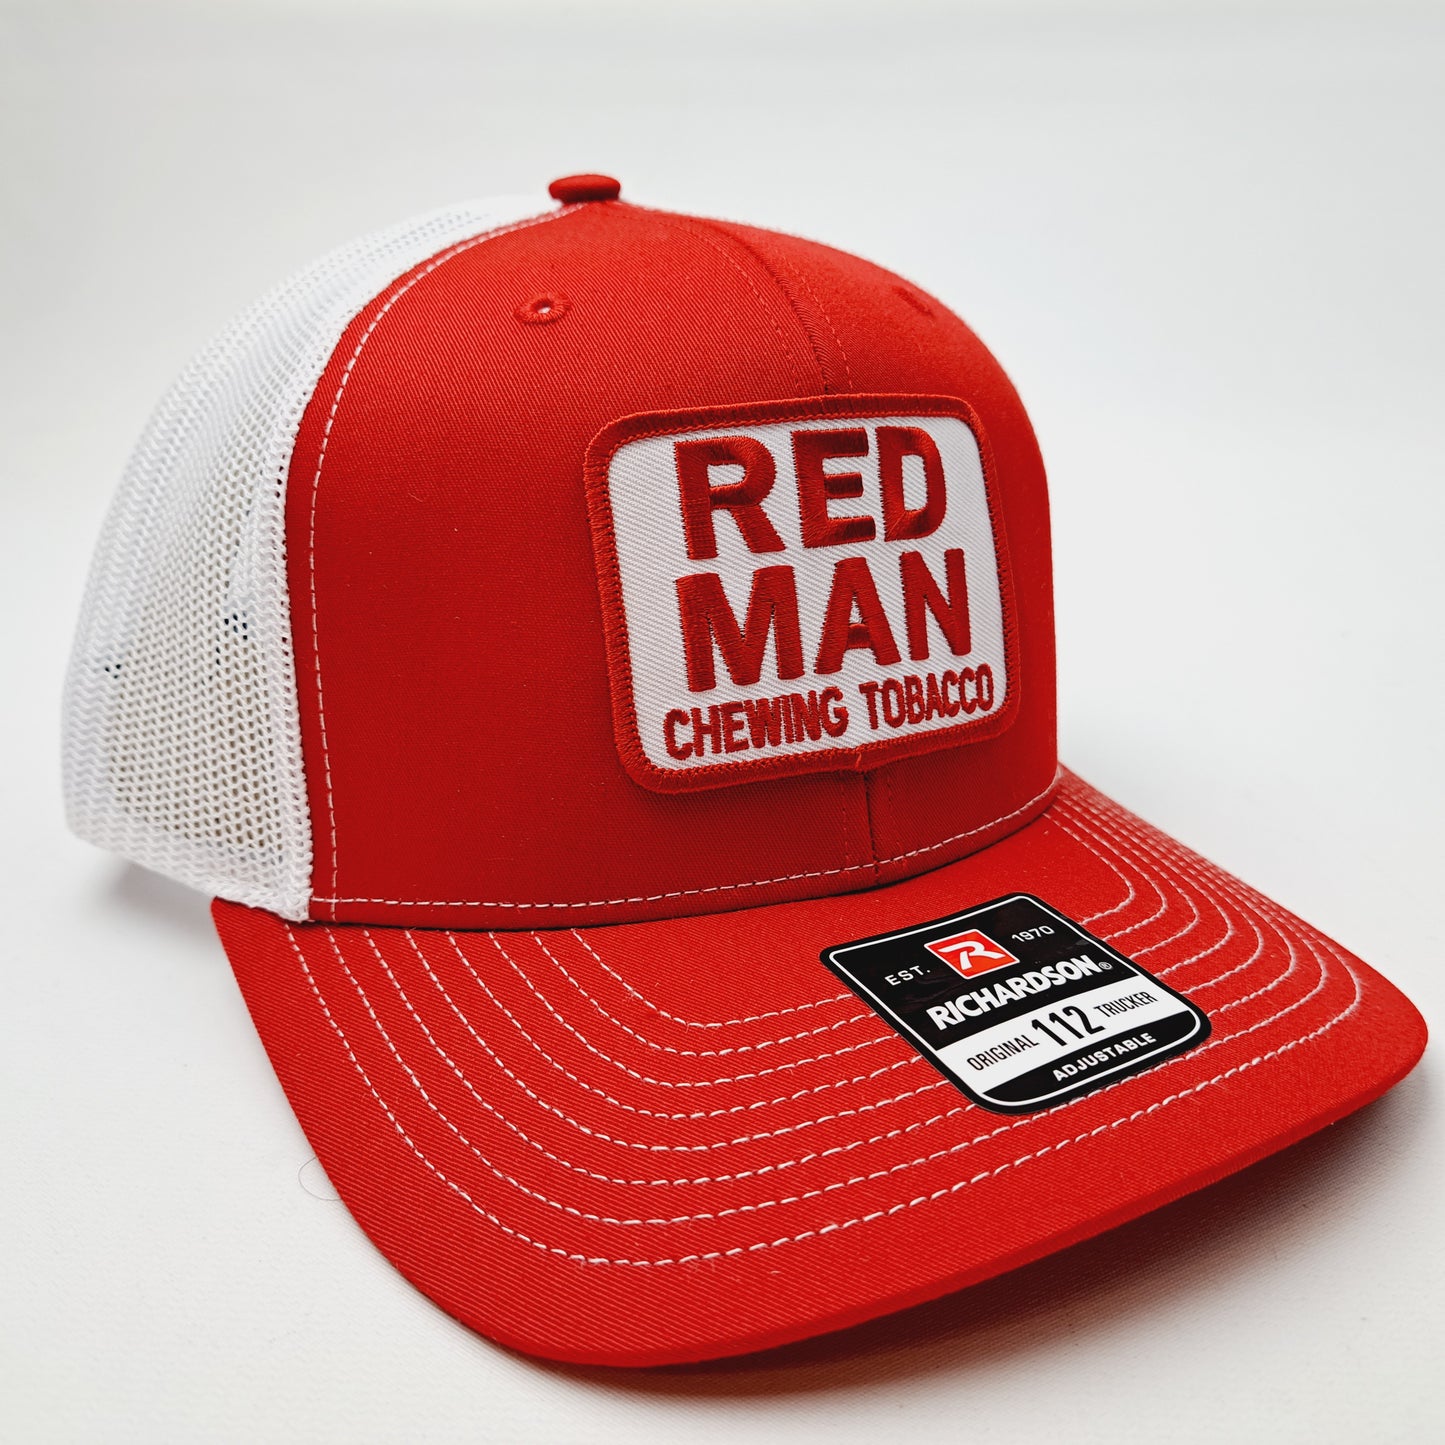 Redman Red Man Embroidered Patch Richardson 112 Trucker Mesh Snapback Cap Hat Red & White